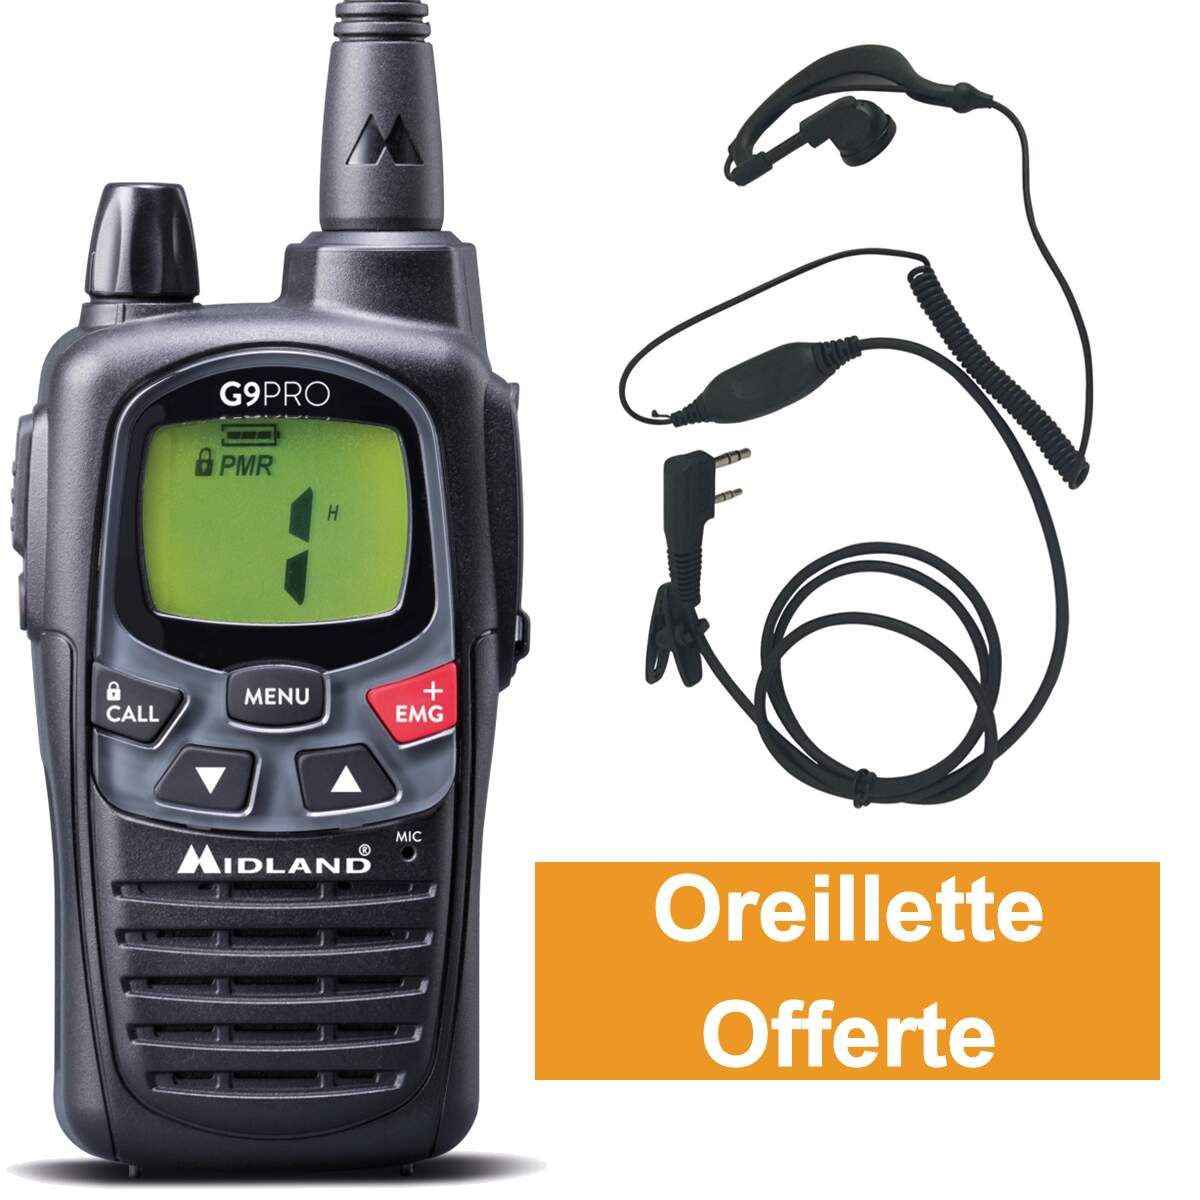 Midland PRO G9 Plus 5W- 30 Km Export Chasse Booster - Talkies Walkies  MIDLAND Talkie-Walkie - G9 PRO PMR446/LPD - Midland - Mid